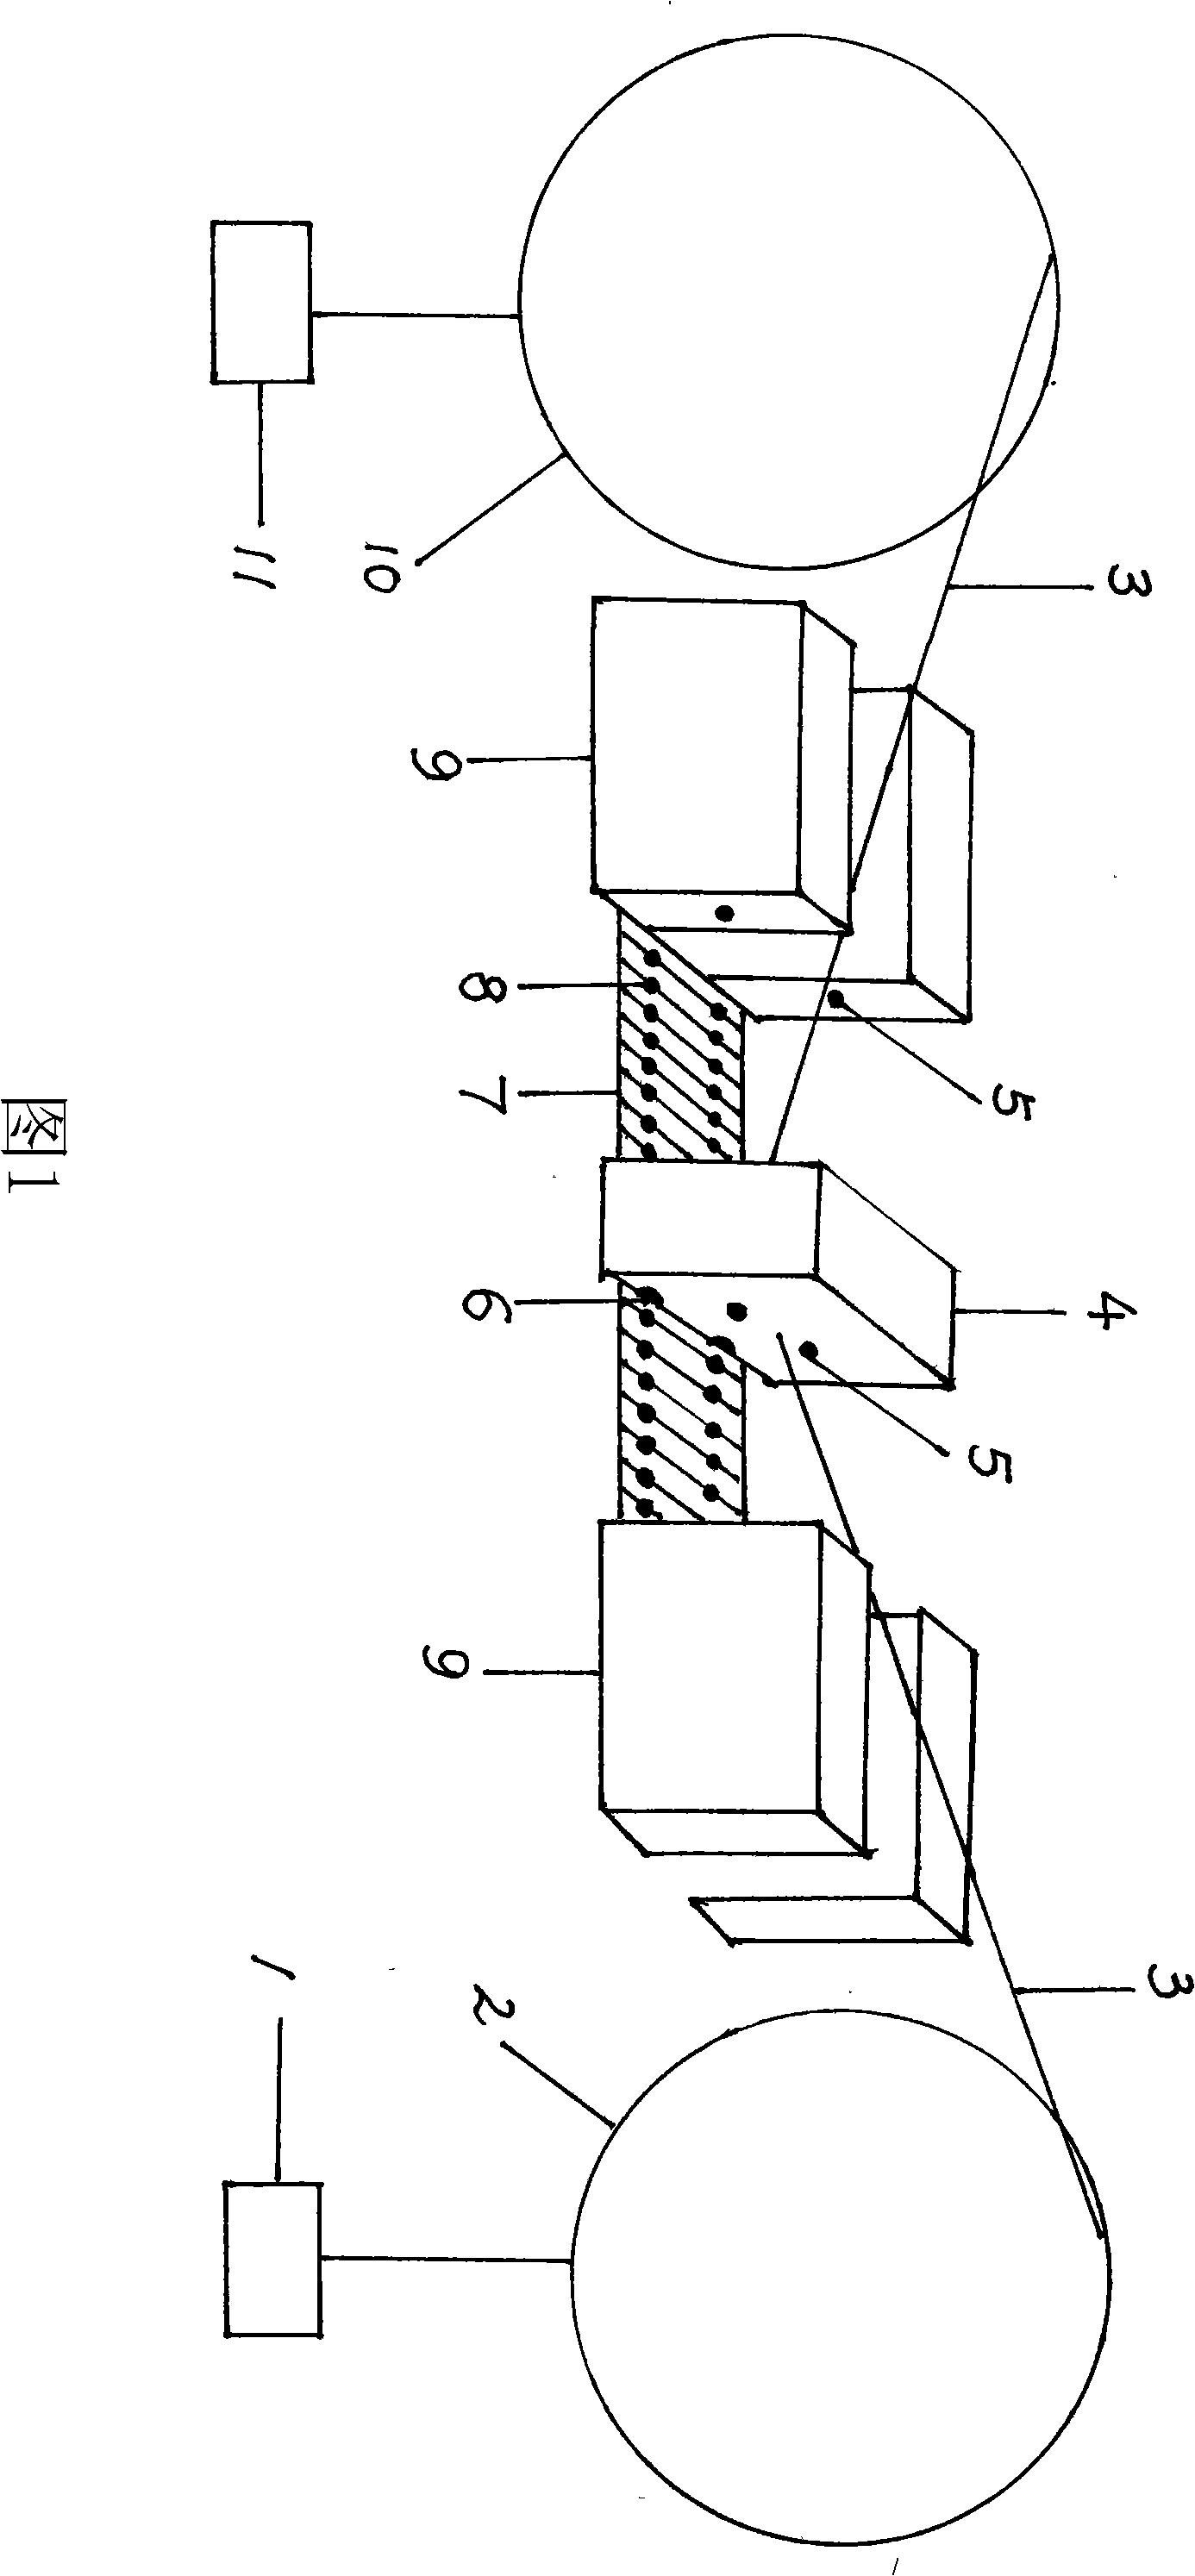 Generating apparatus for electric power